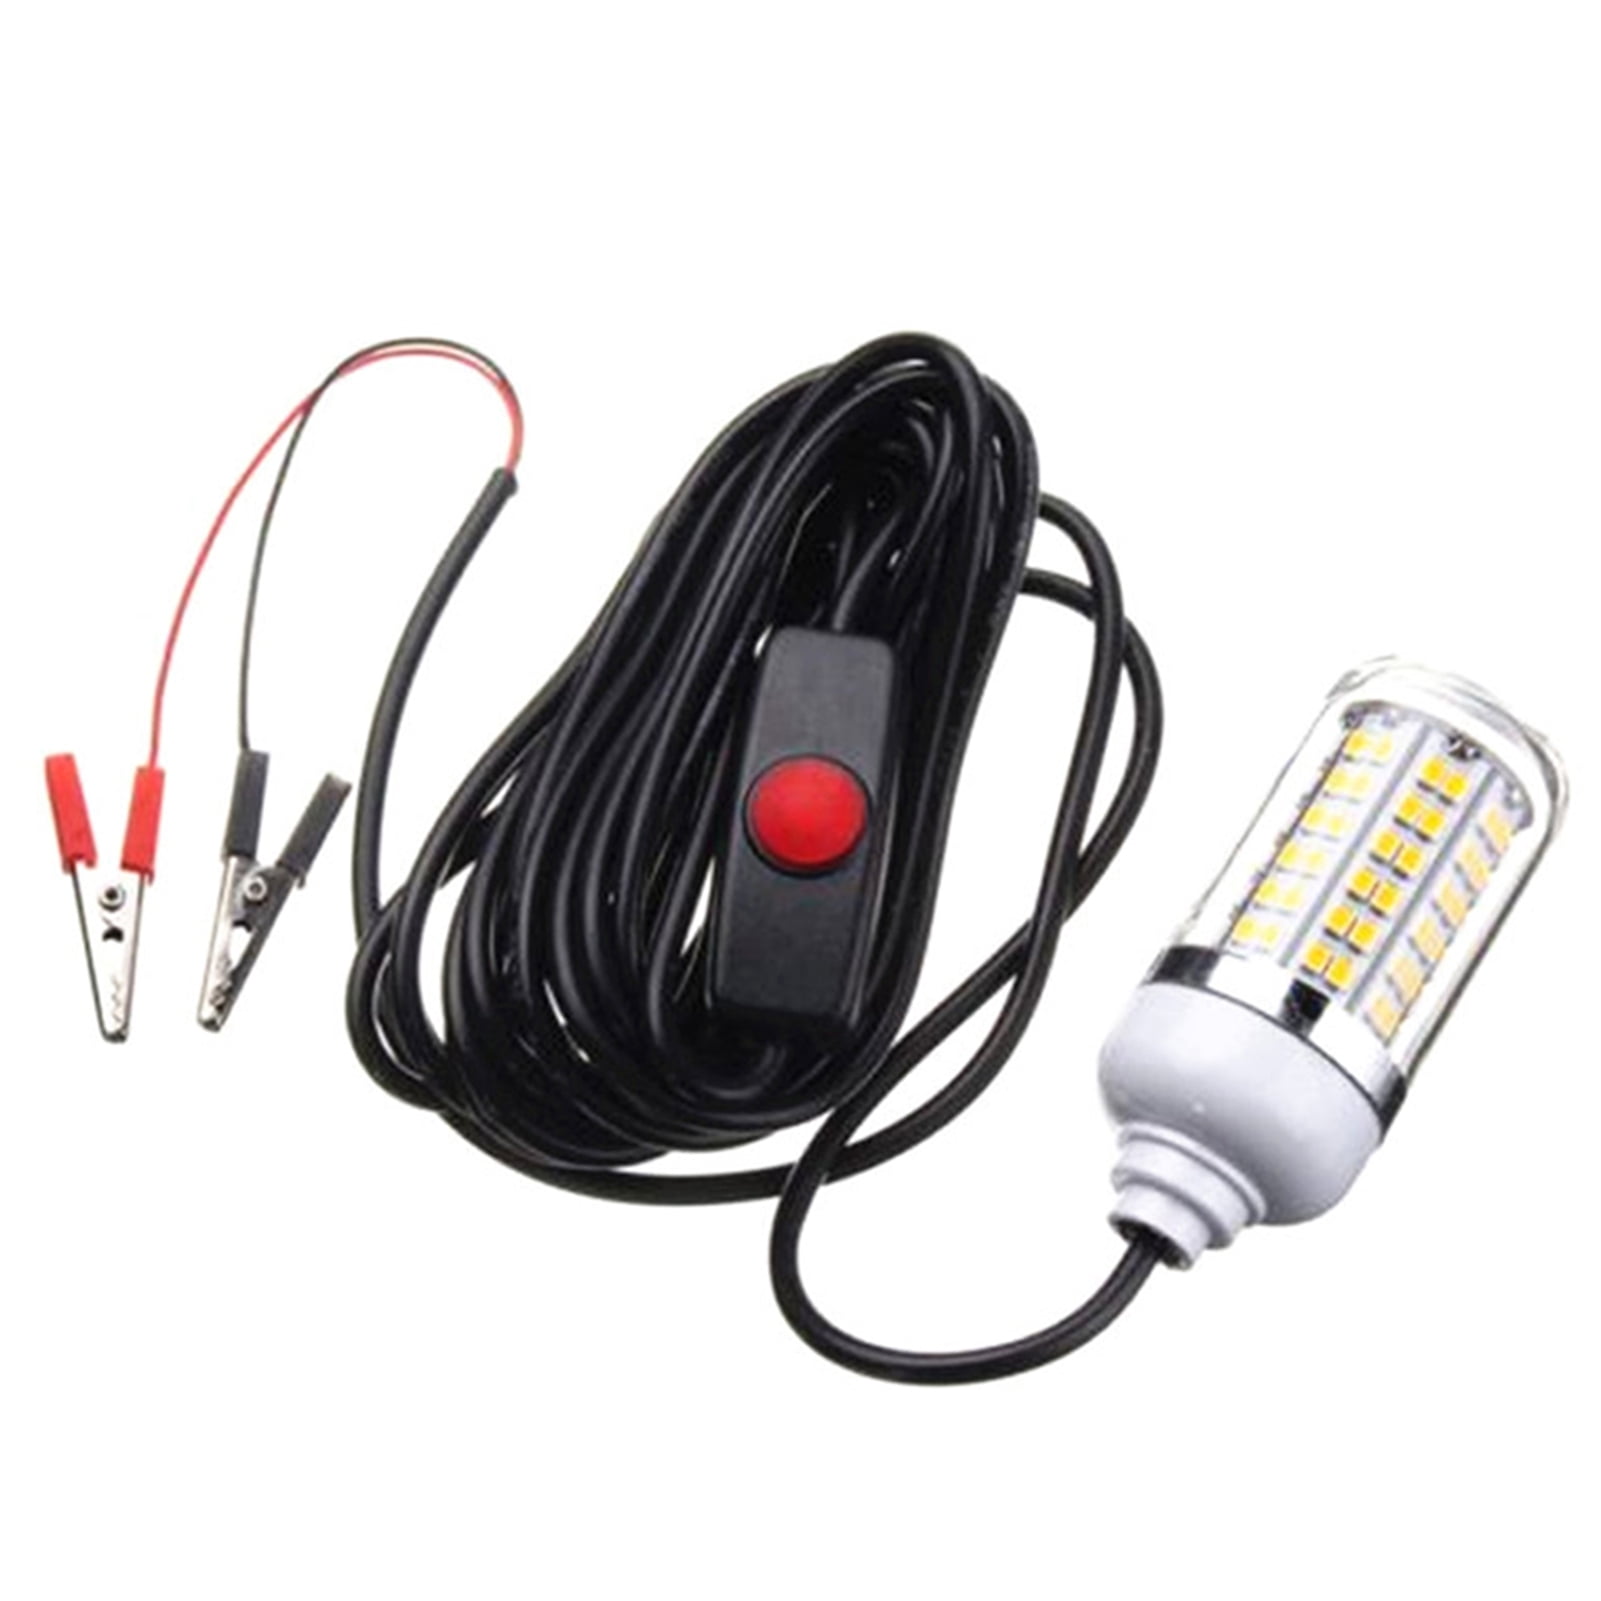 Details about   12V Green Blue Warm Night Fishing Light LED Submersibe Underwater Finder Lamp 